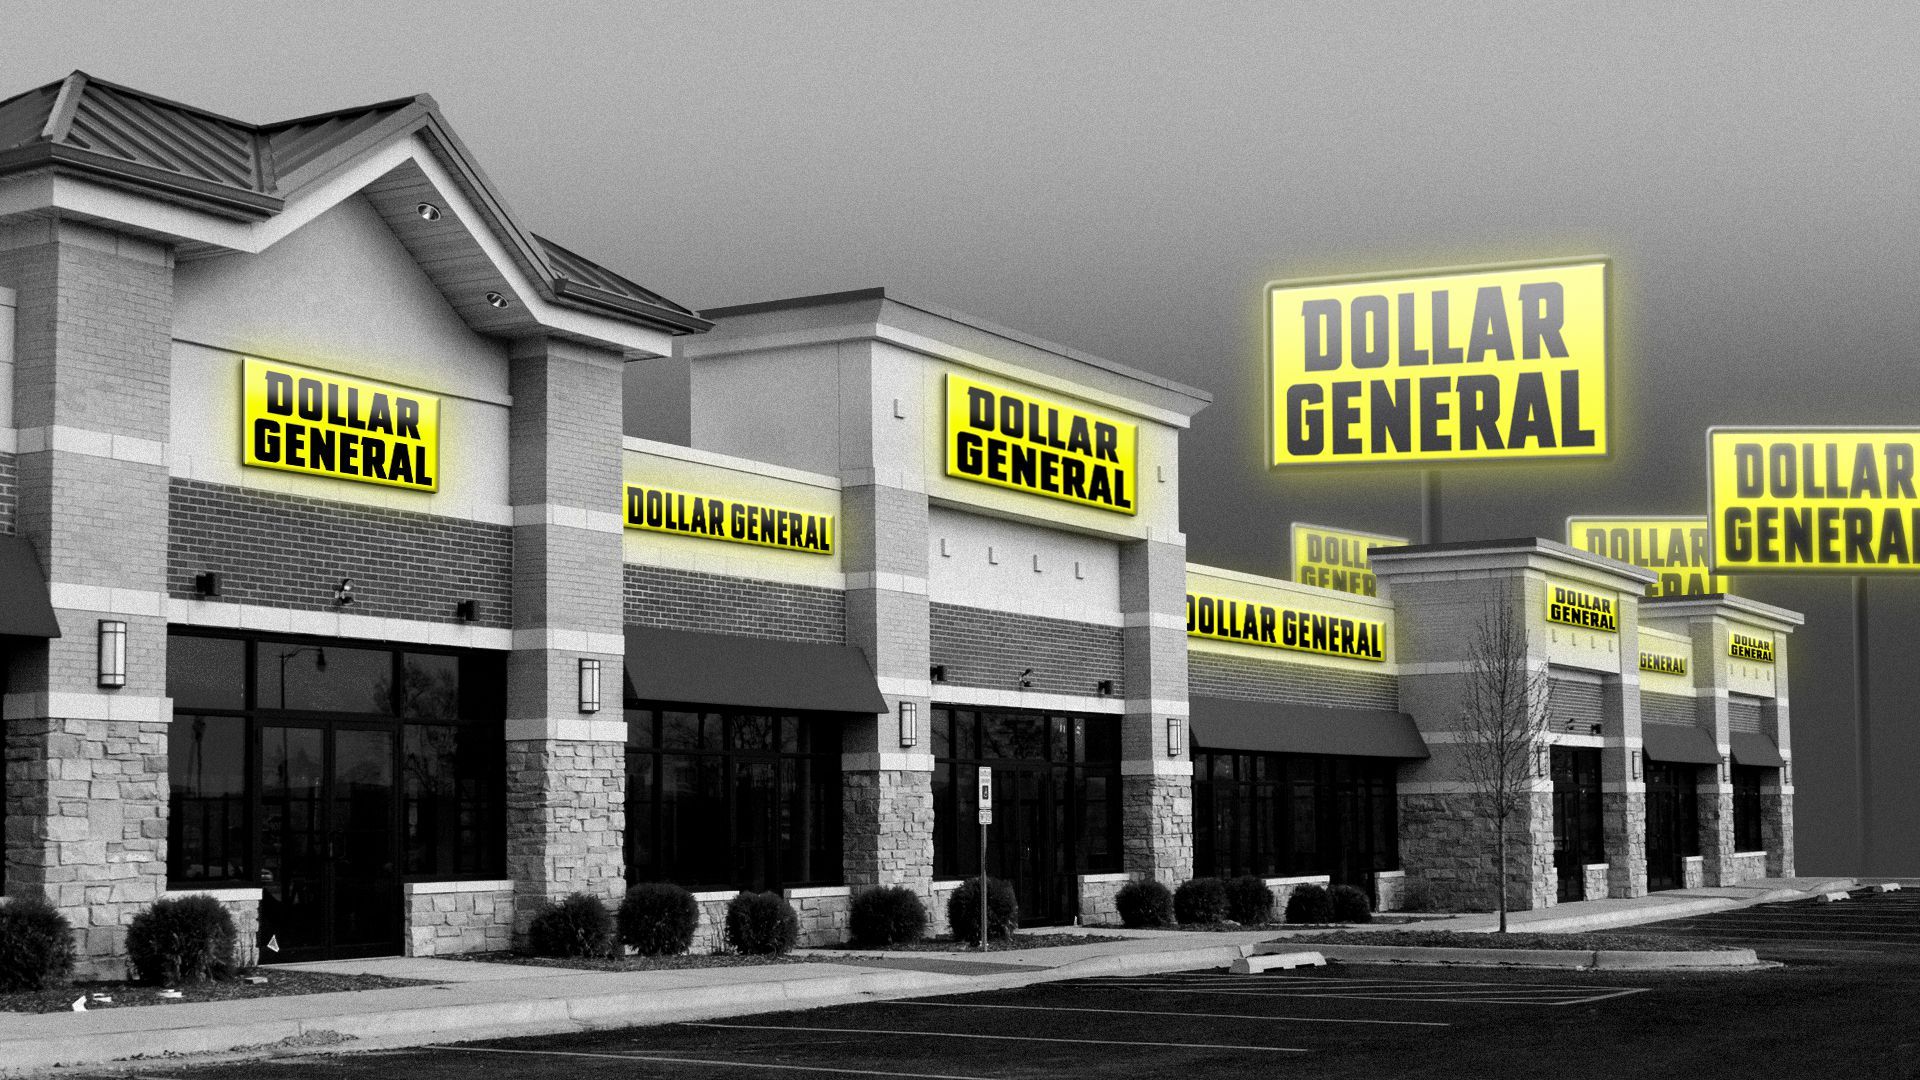 Illustration of a strip mall dominated by Dollar General signs